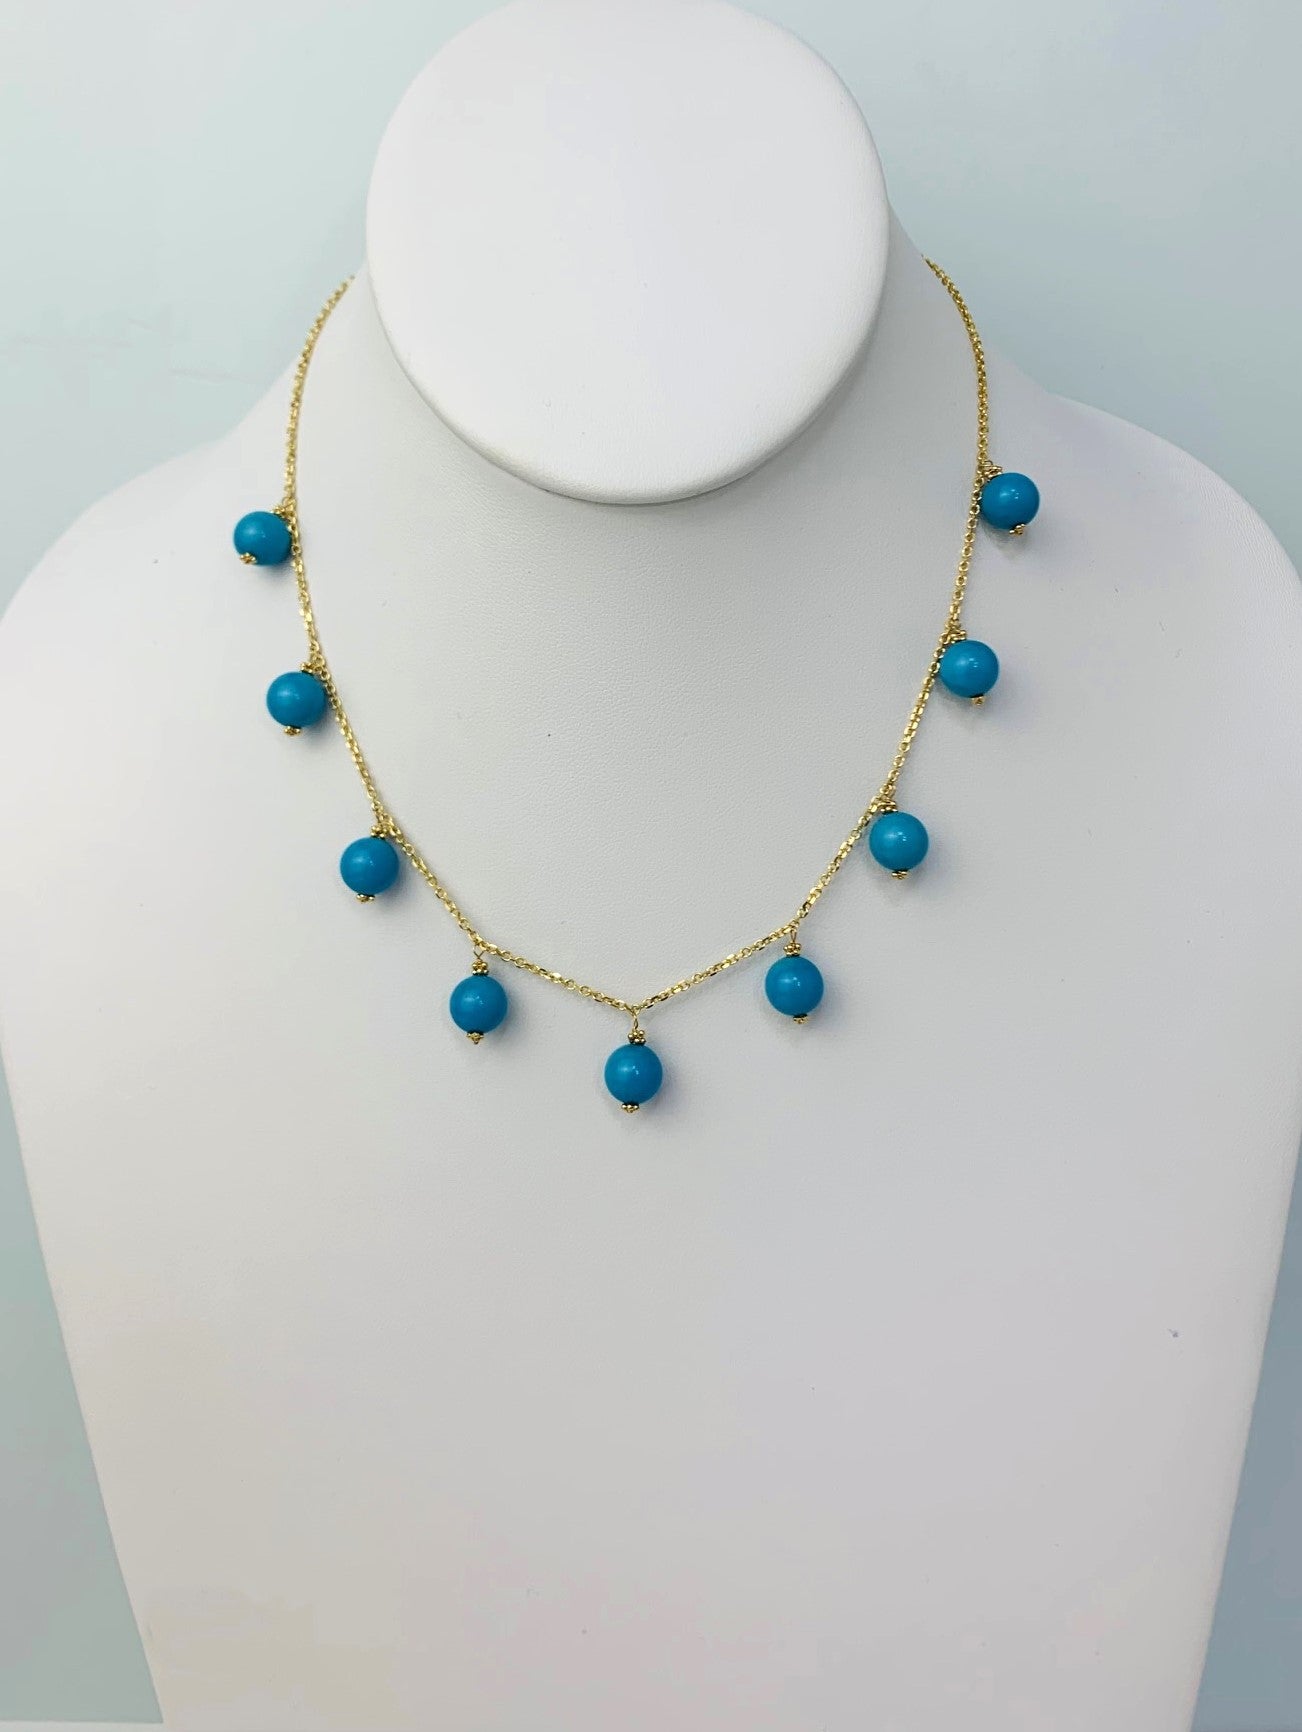 16"-17" Turquoise Dangly Necklace in 14KY - NCK-243-DNGGM14Y-TQ-16